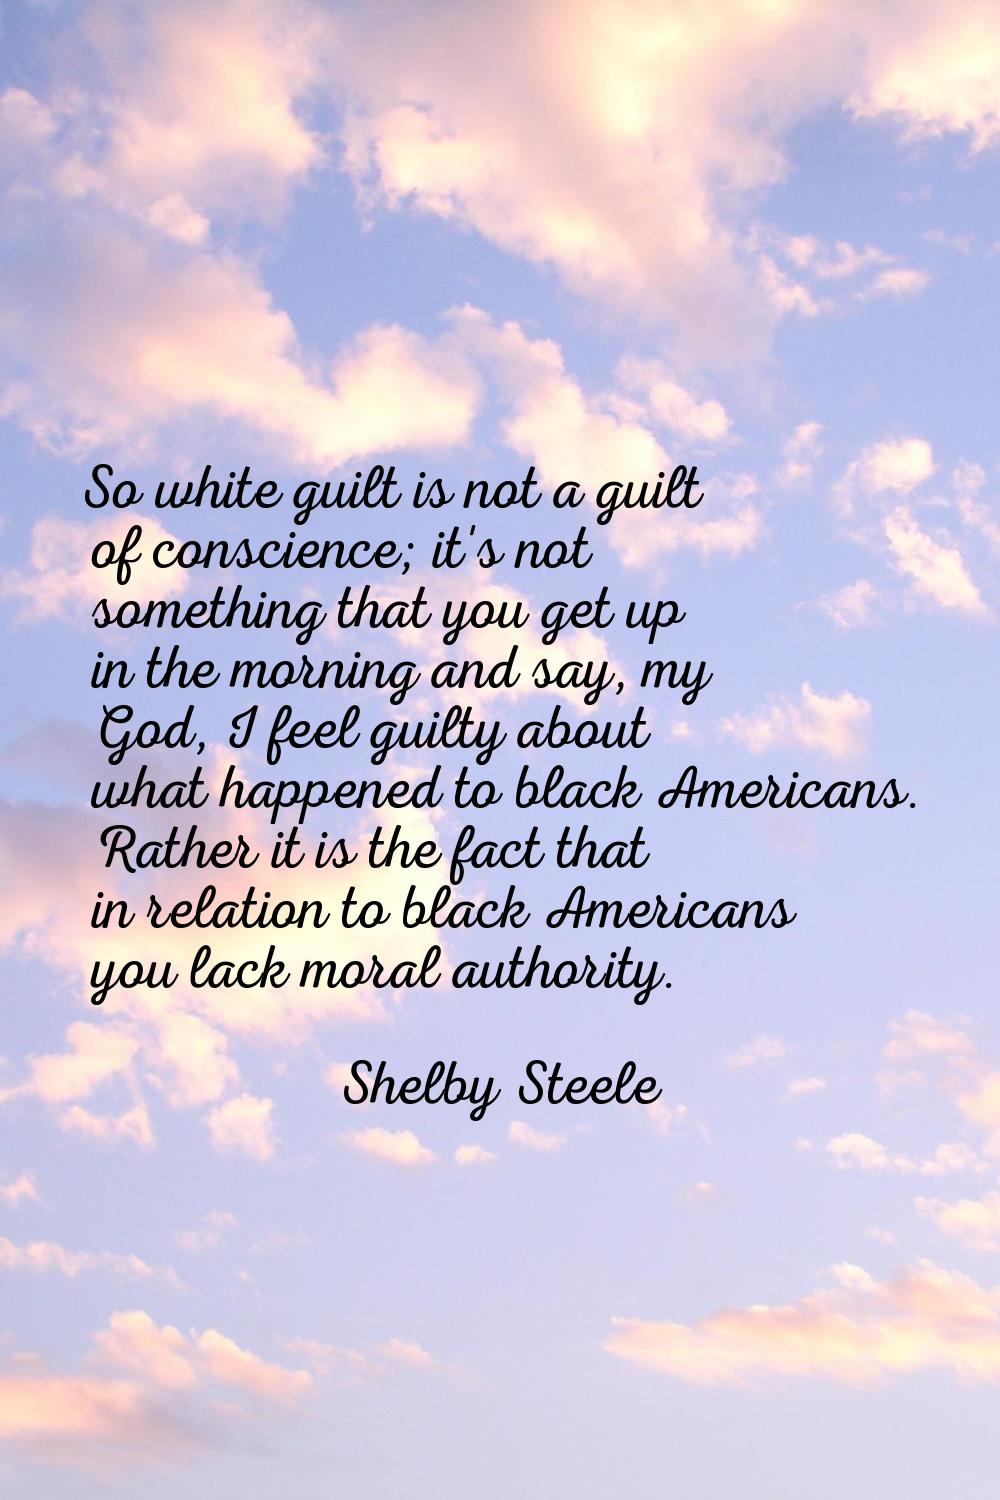 So white guilt is not a guilt of conscience; it's not something that you get up in the morning and 